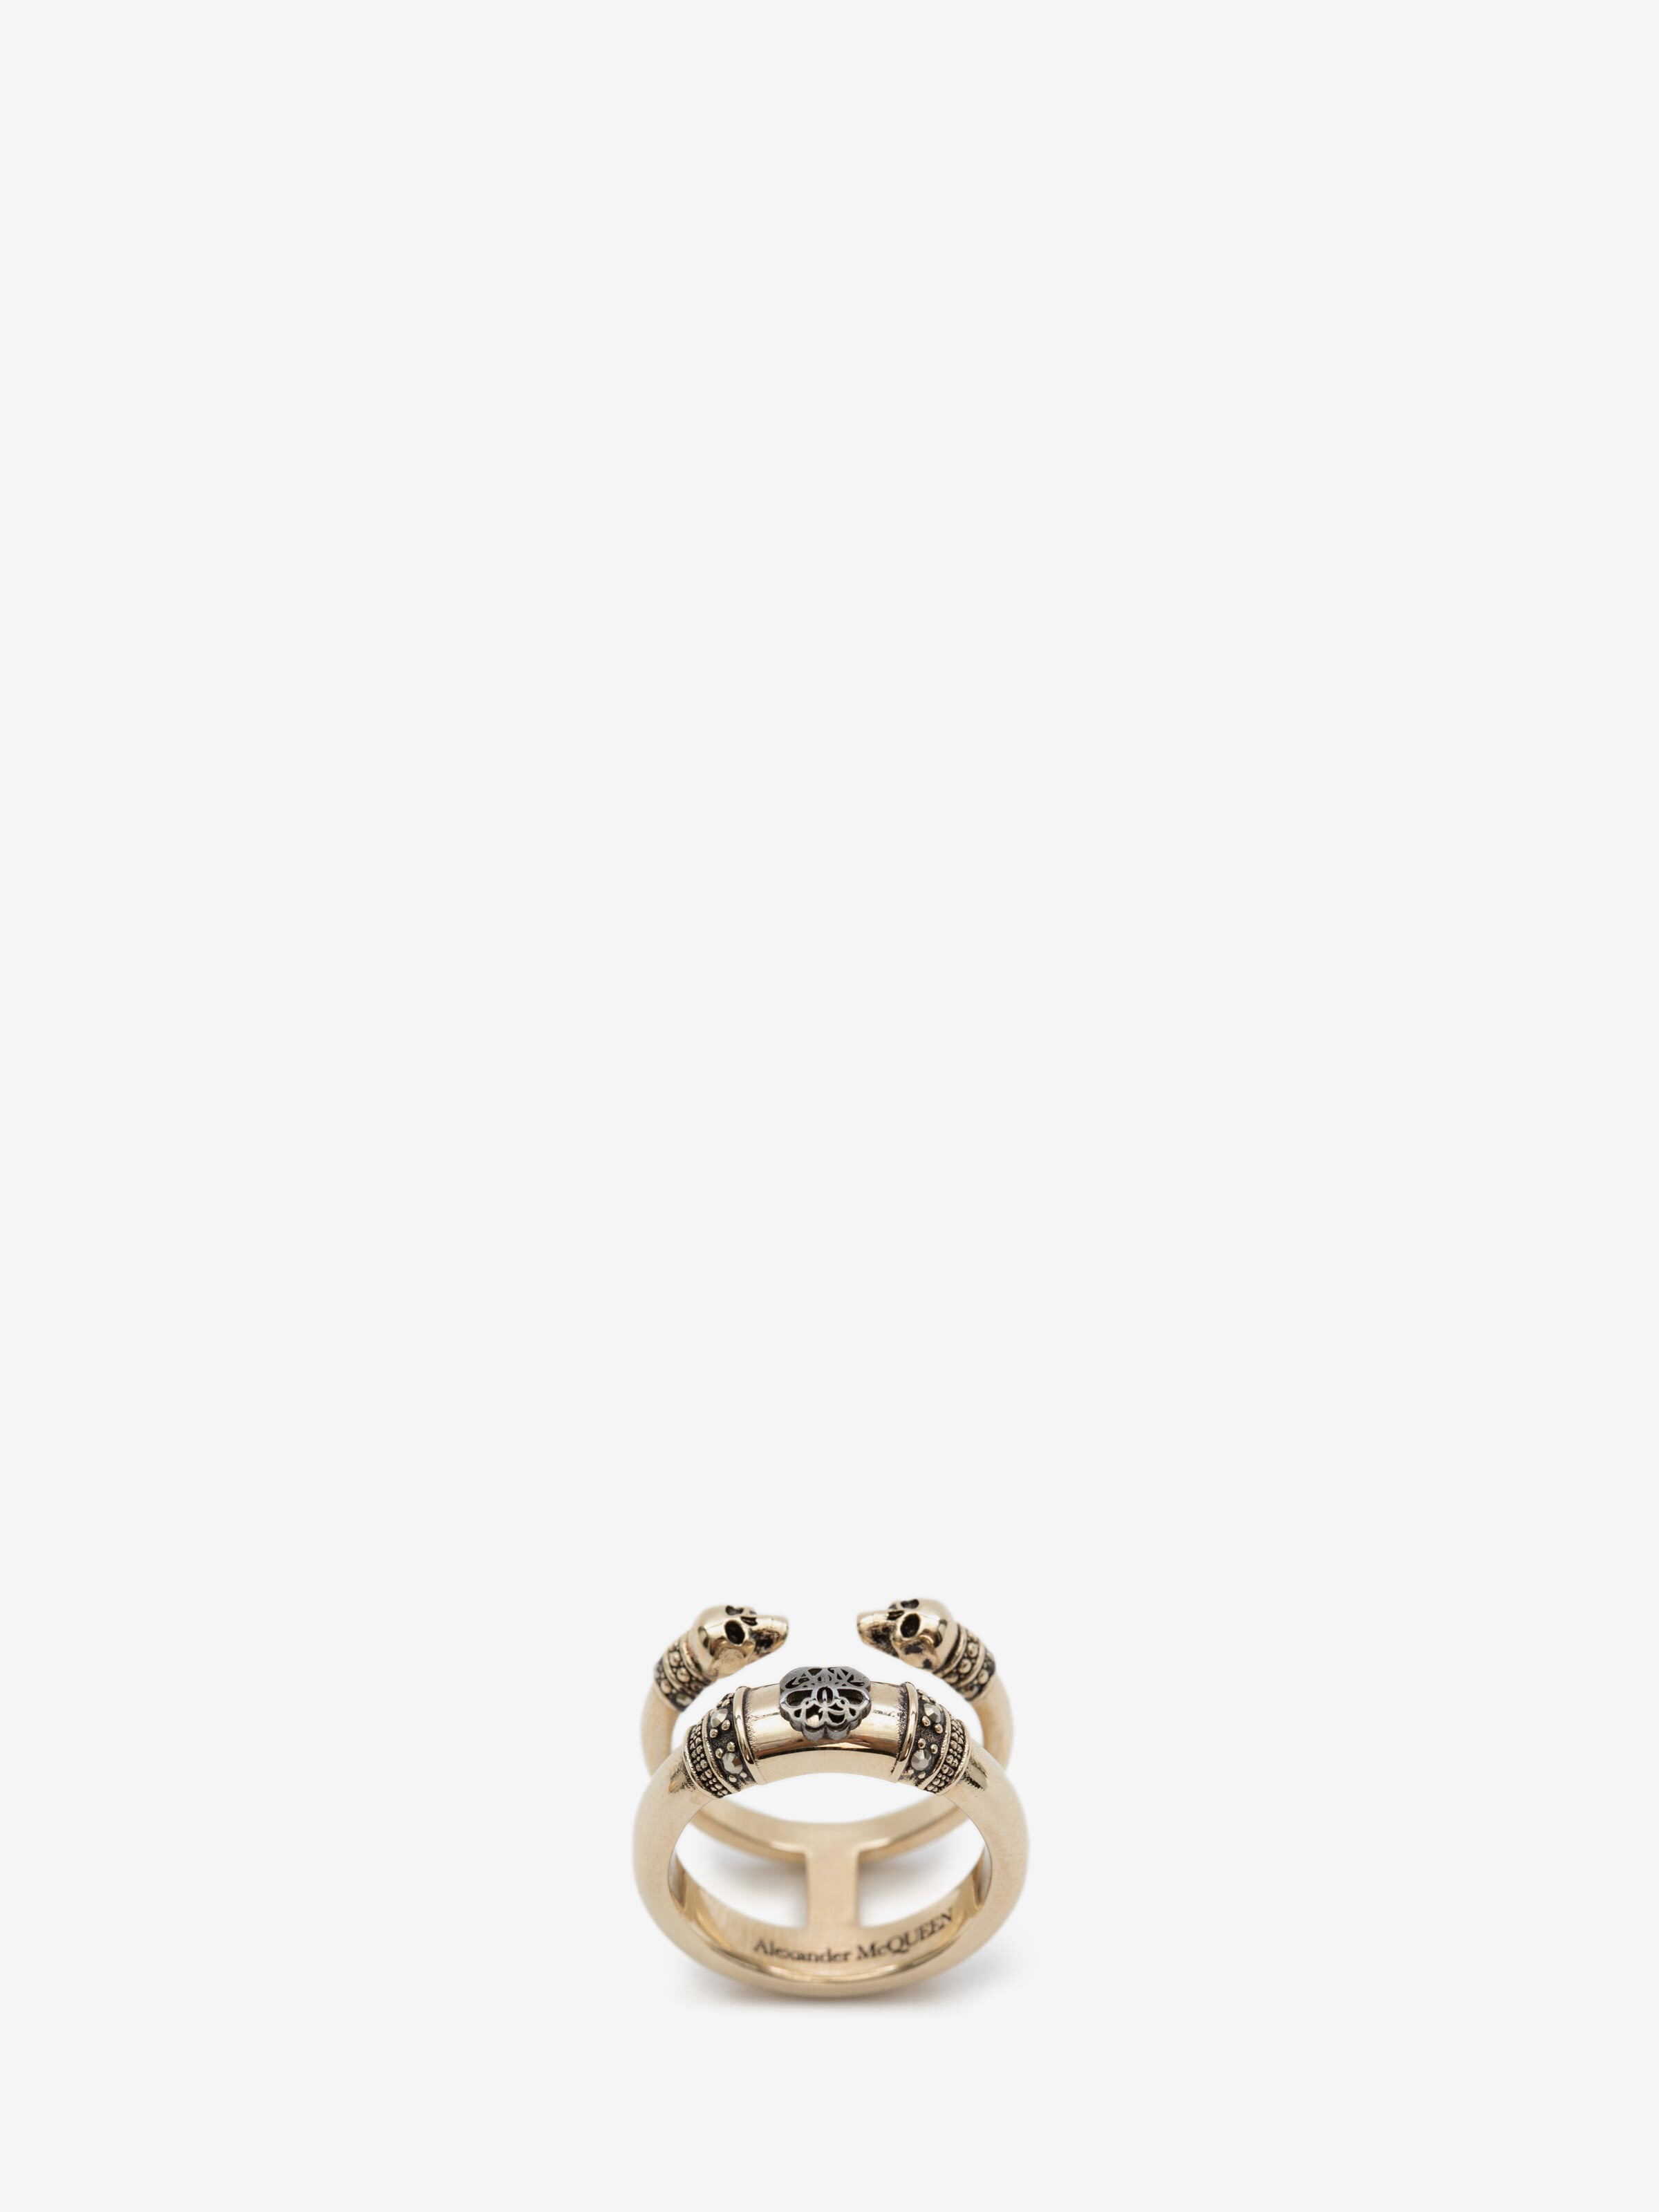 ALEXANDER MCQUEEN SKULL AND CHARM SEAL DOUBLE RING,630070J160X